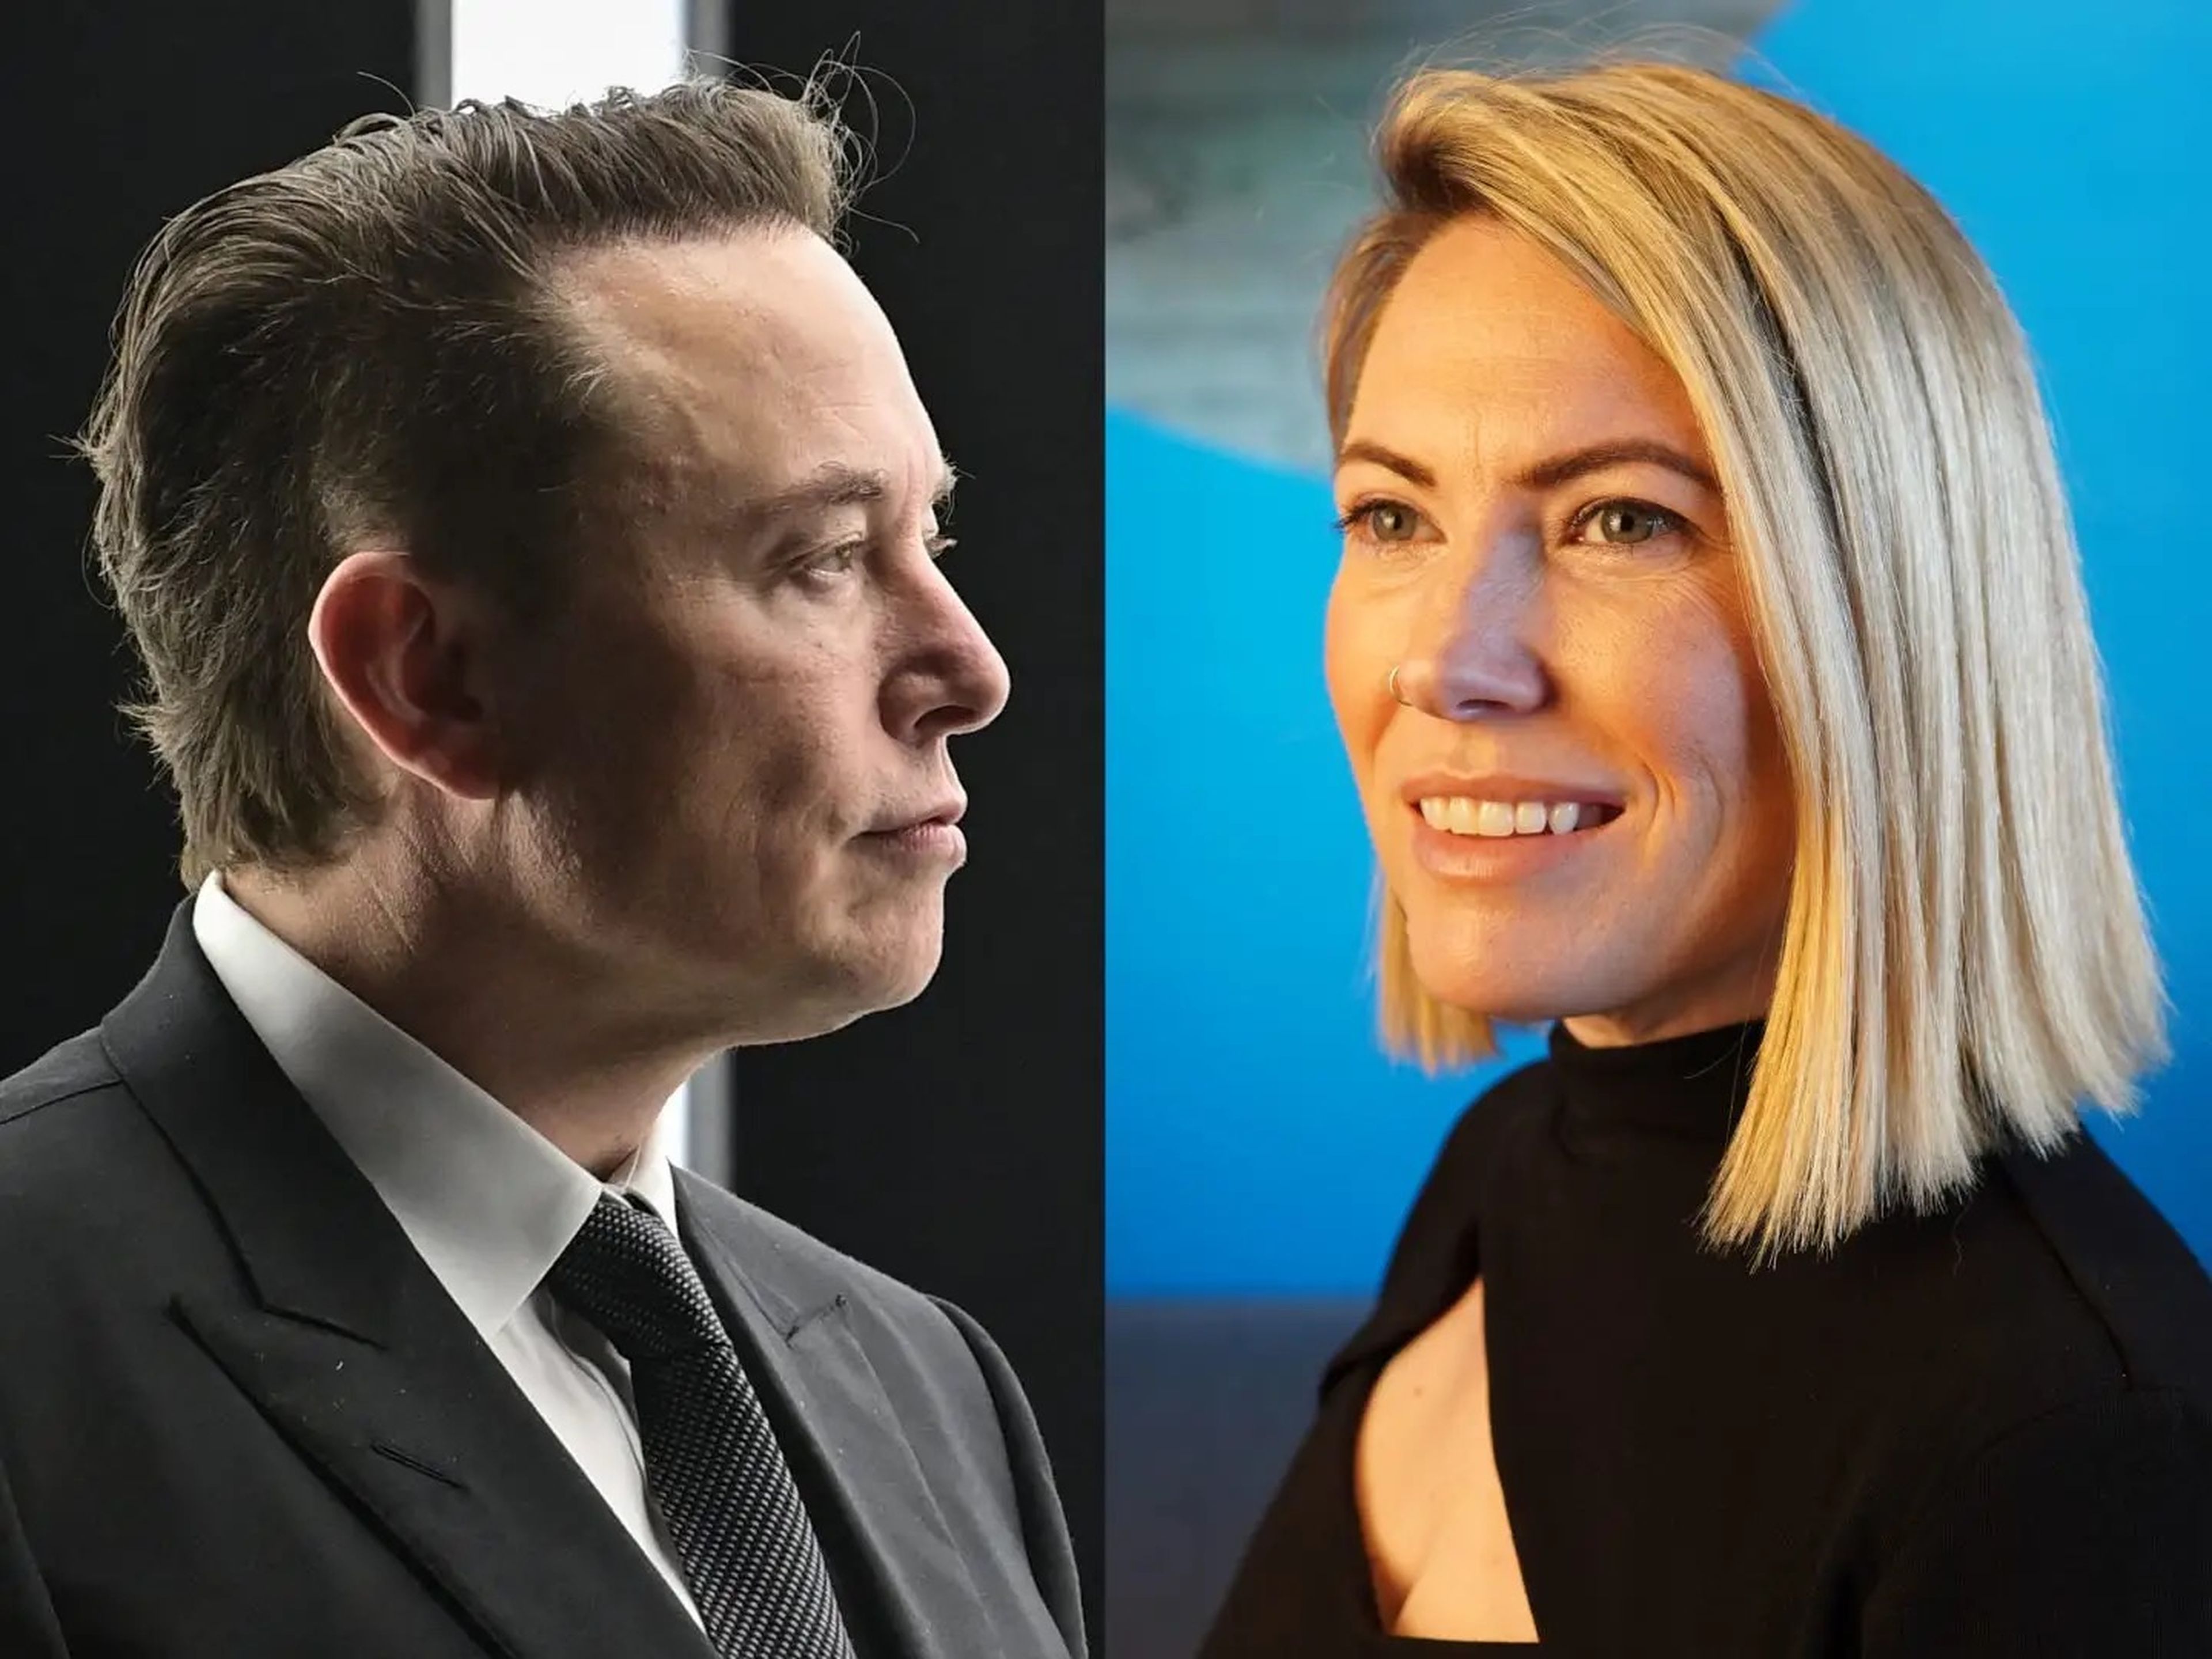 Composite close-up images of Elon Musk and Esther Crawford